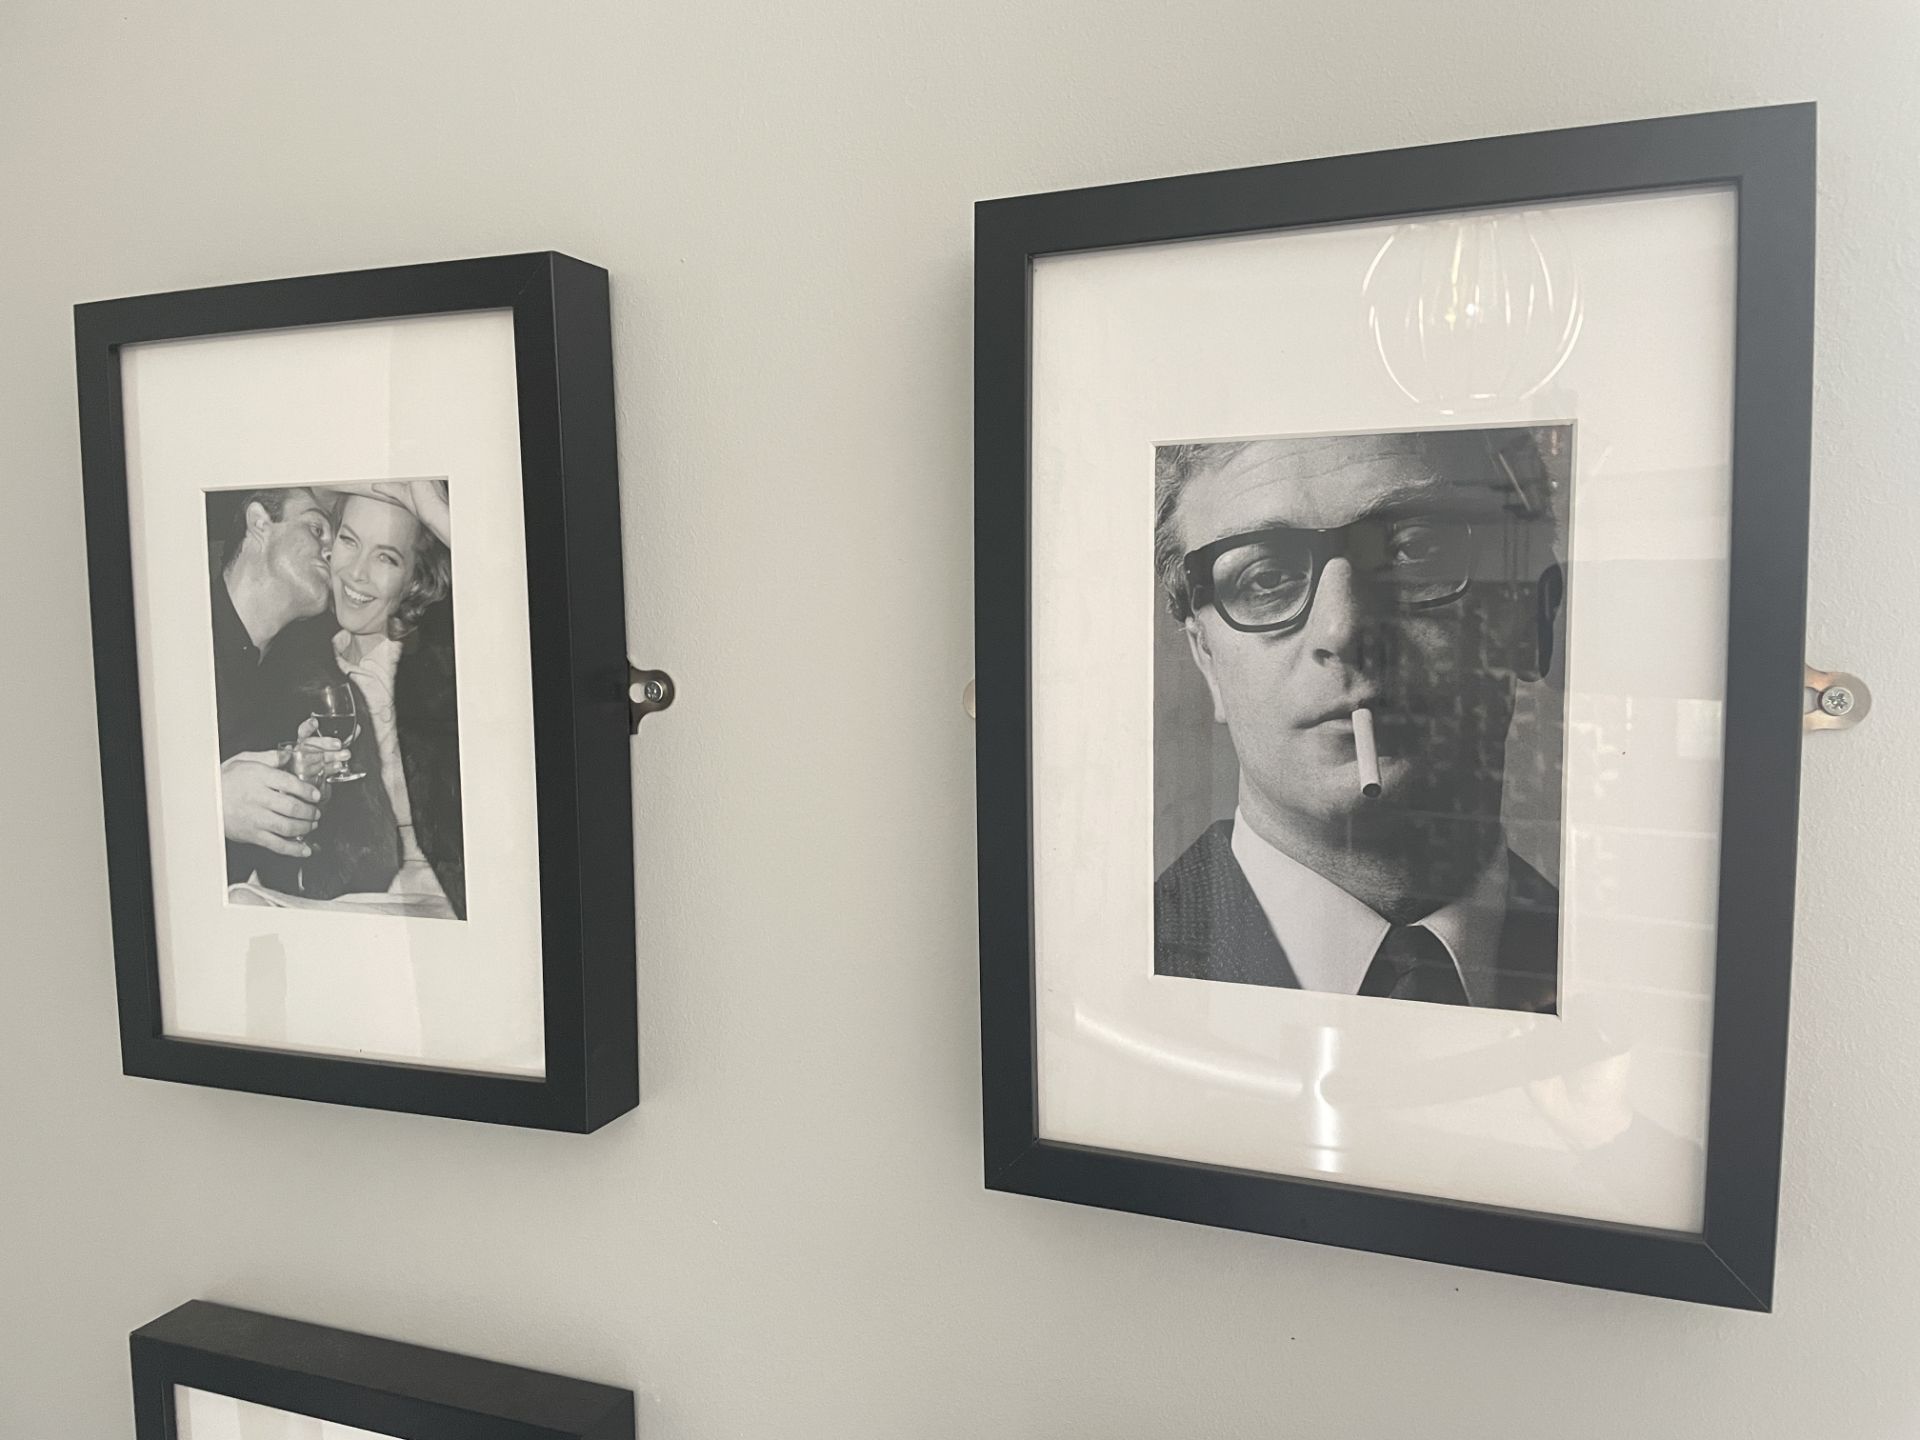 4 x Wall Pictures Featuring Well Known 1960's Actors - Black and White Images With Black Frames - - Image 4 of 4